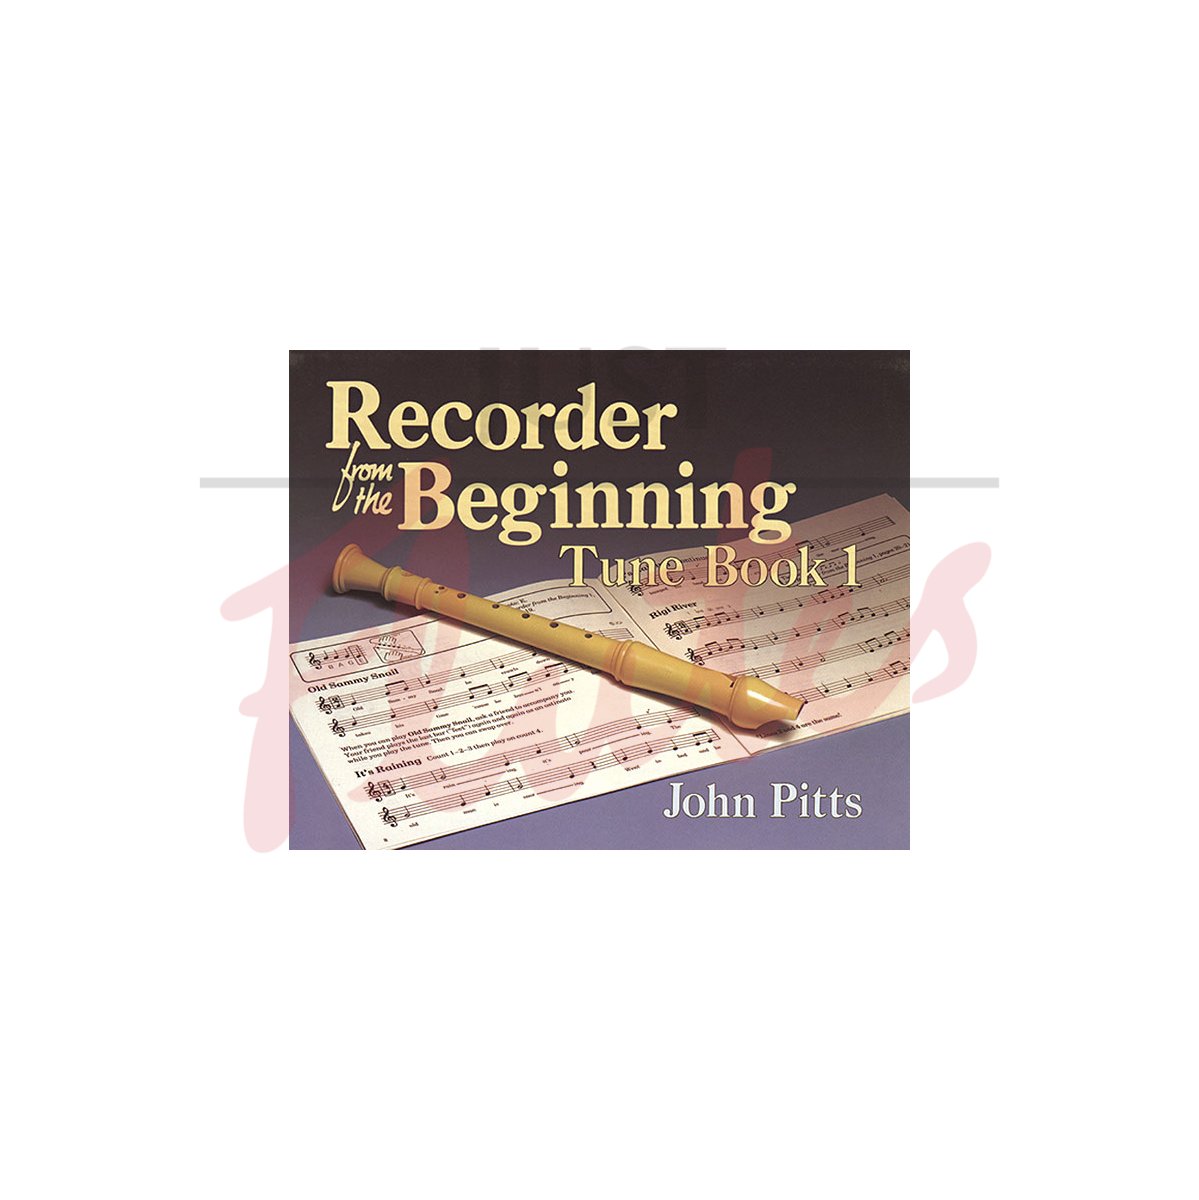 Recorder from the Beginning Tune Book 1